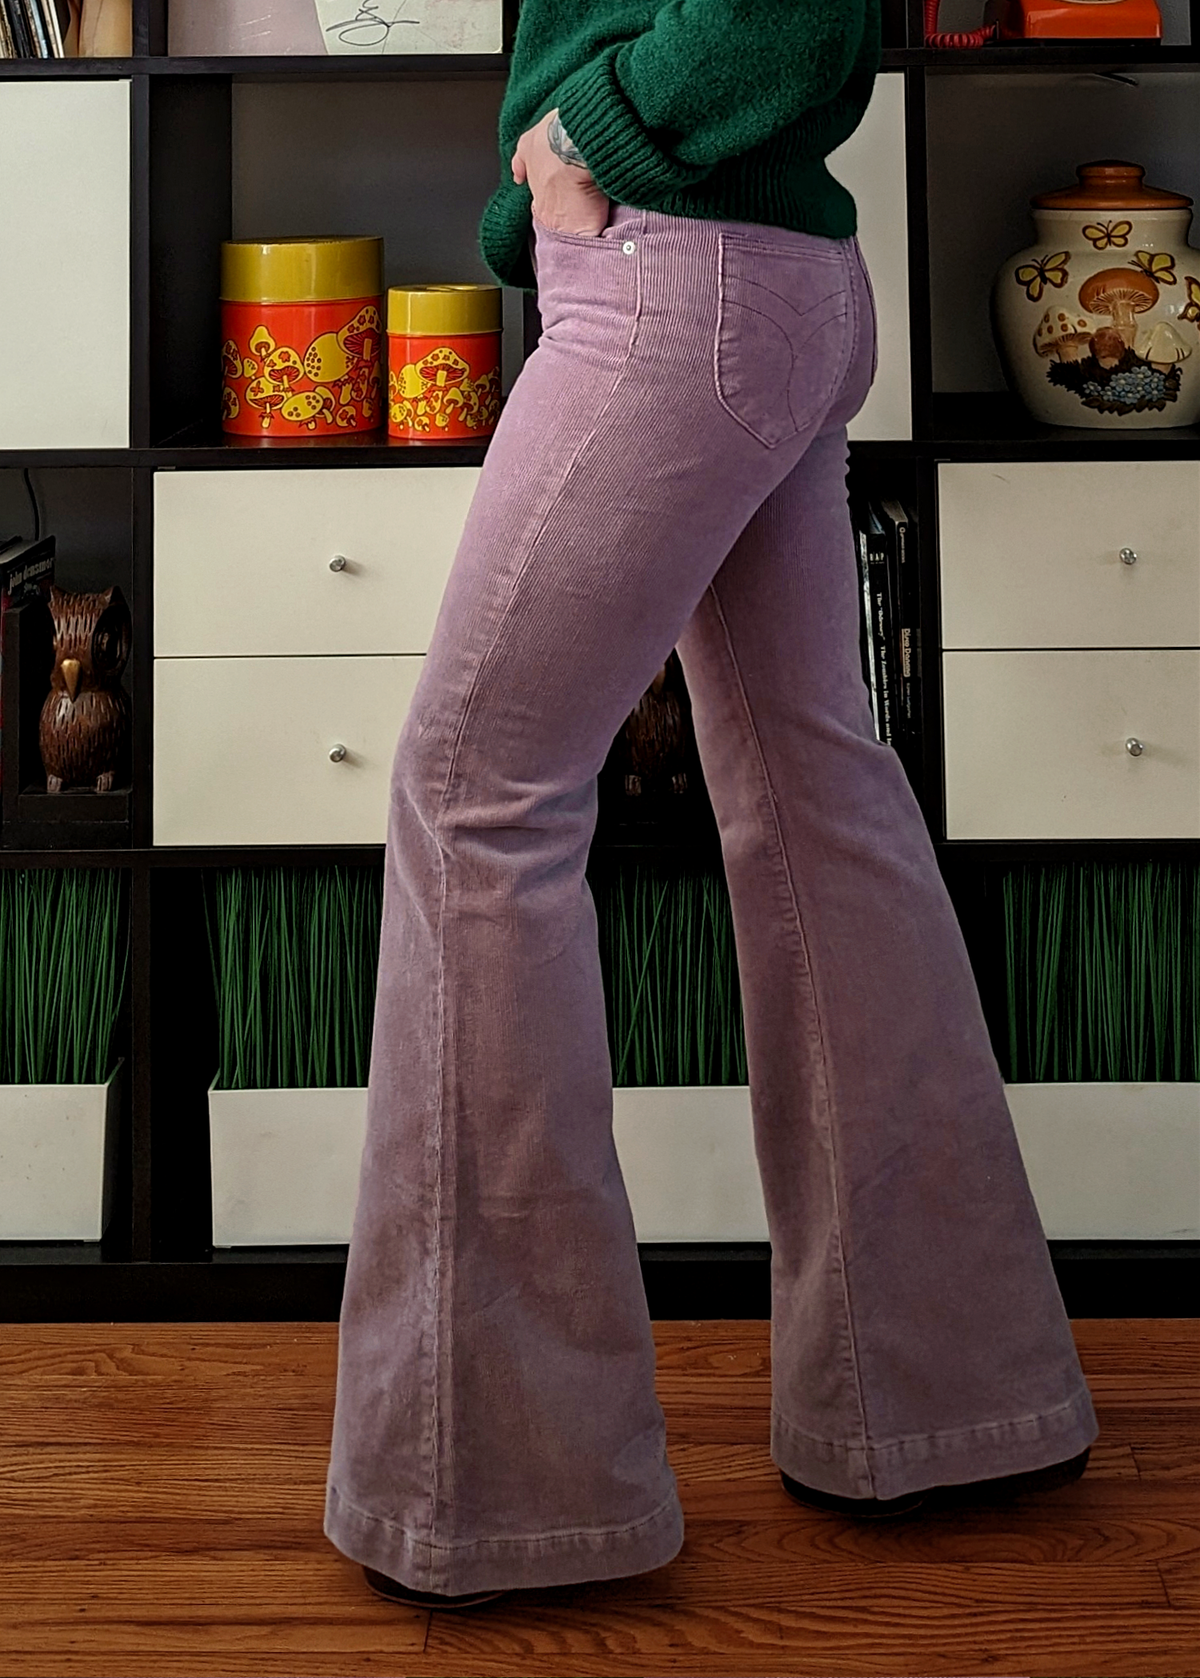 70s inspired Dusty Plum purple corduroy Eastcoast Flares with high rise waist by Rolla's Jeans